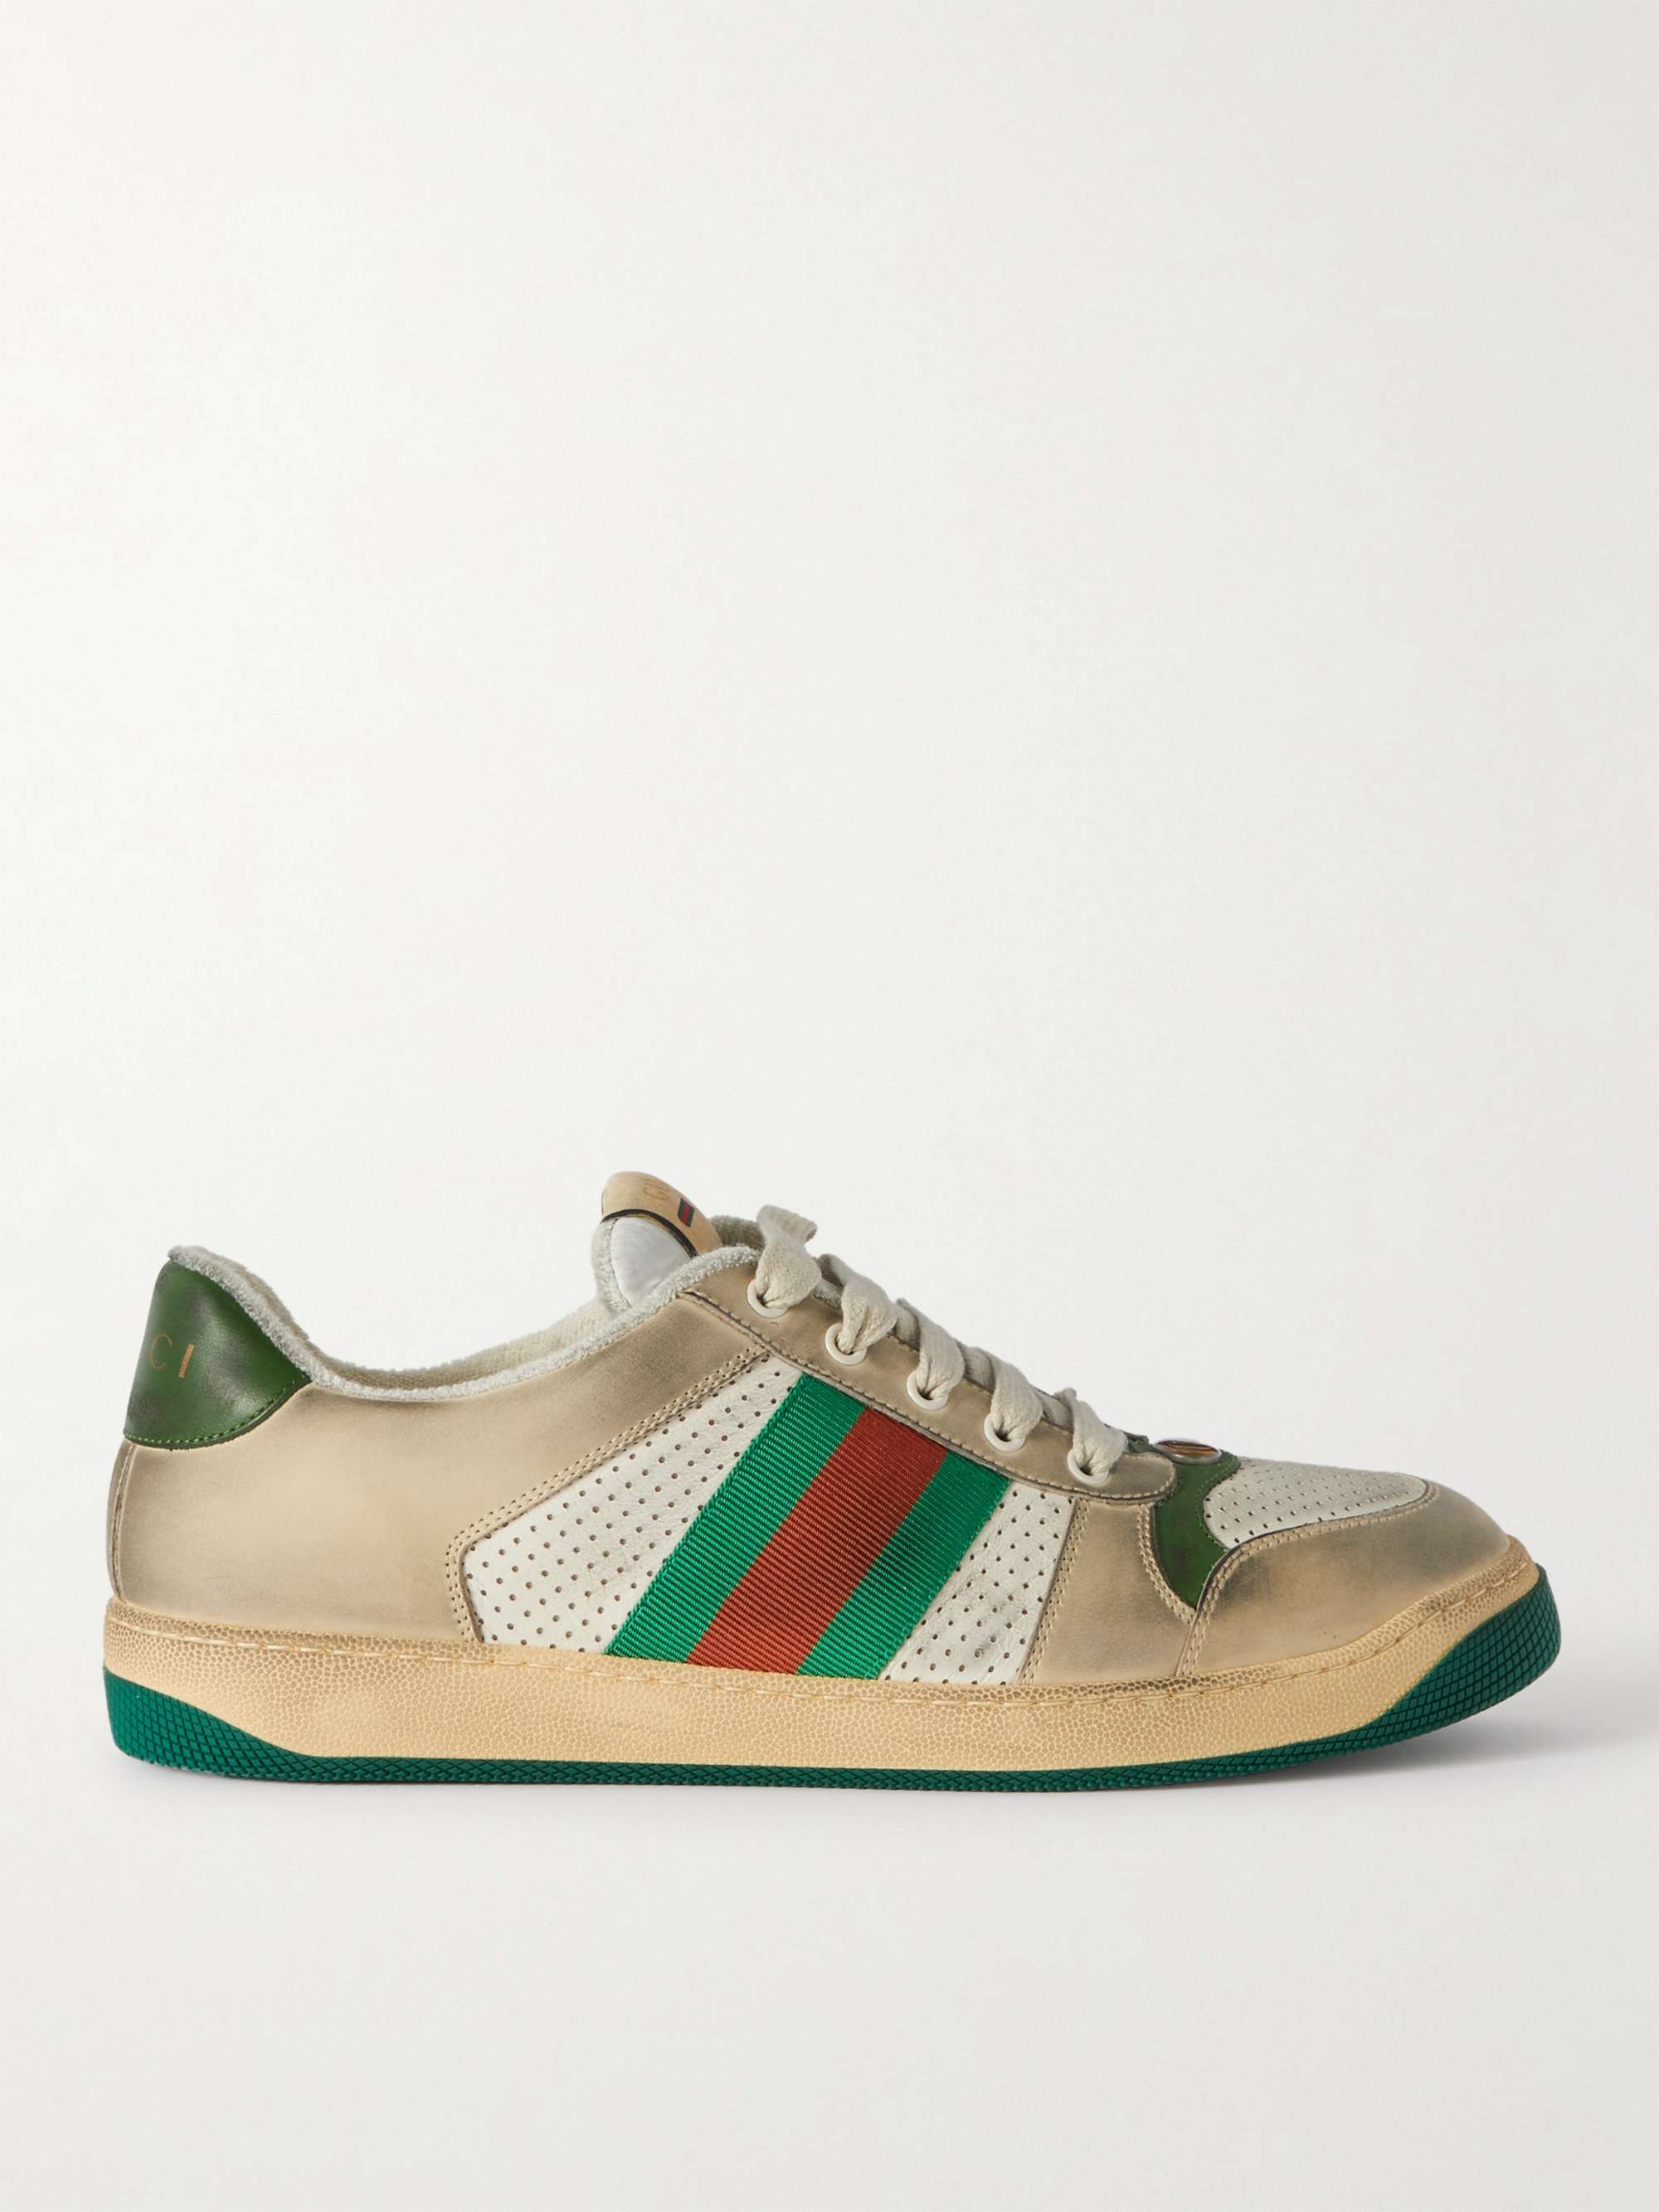 GUCCI Virtus Distressed Leather and Webbing Sneakers for Men | MR PORTER